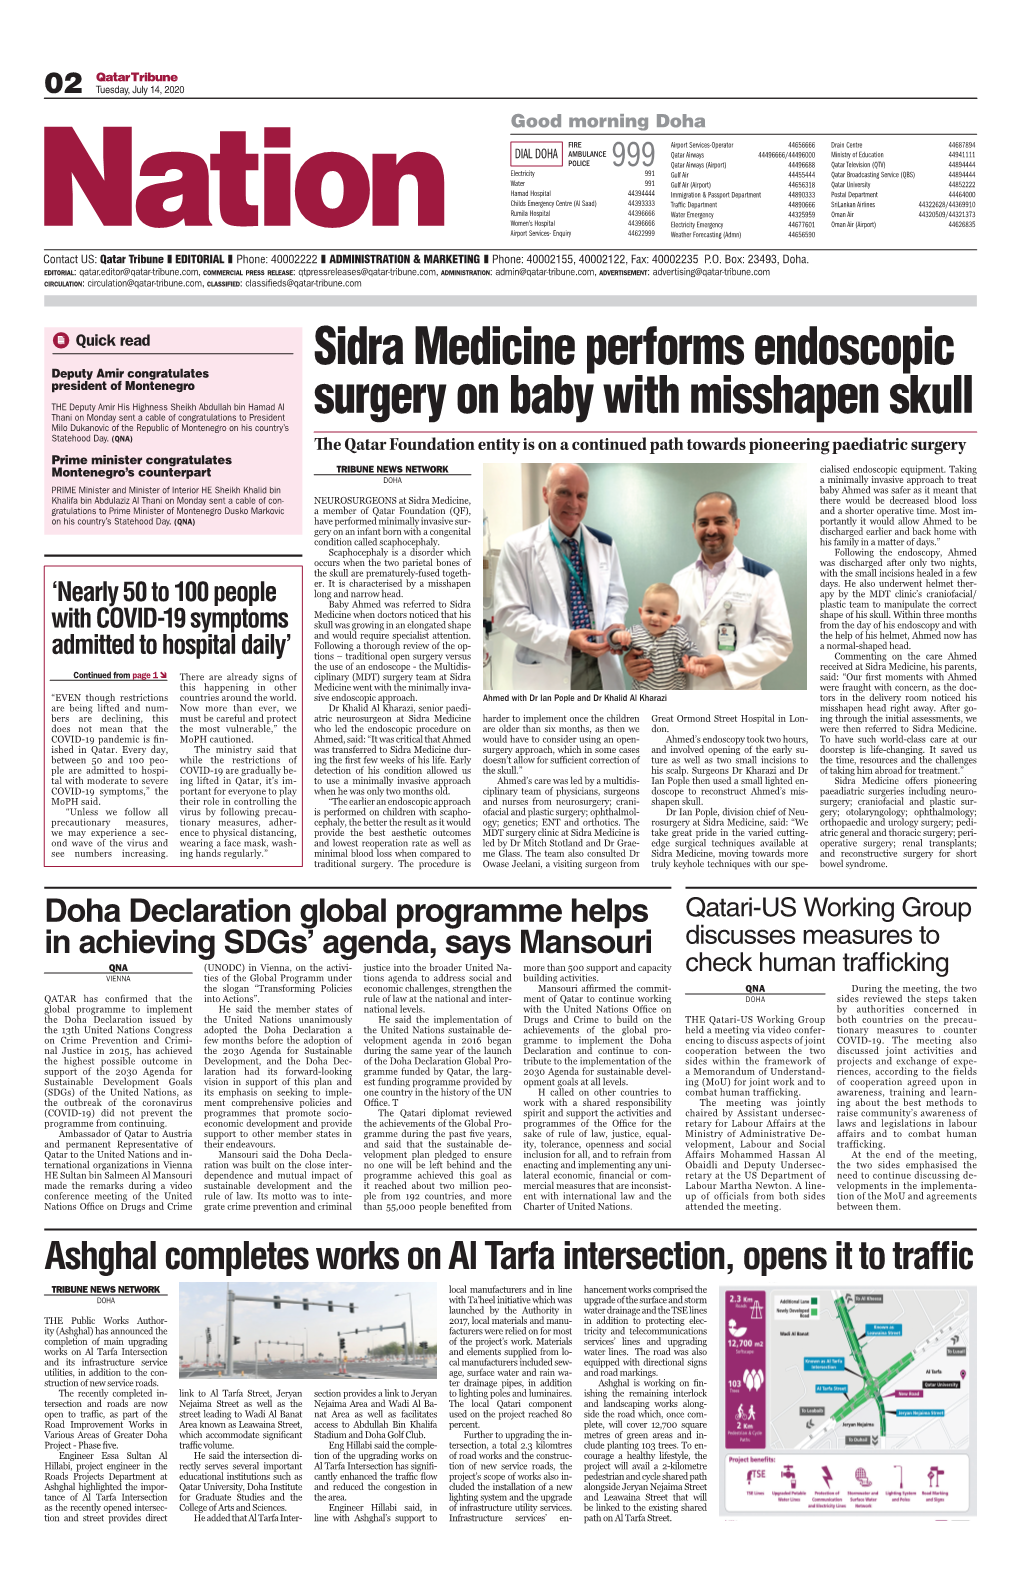 Sidra Medicine Performs Endoscopic Surgery on Baby with Misshapen Skull